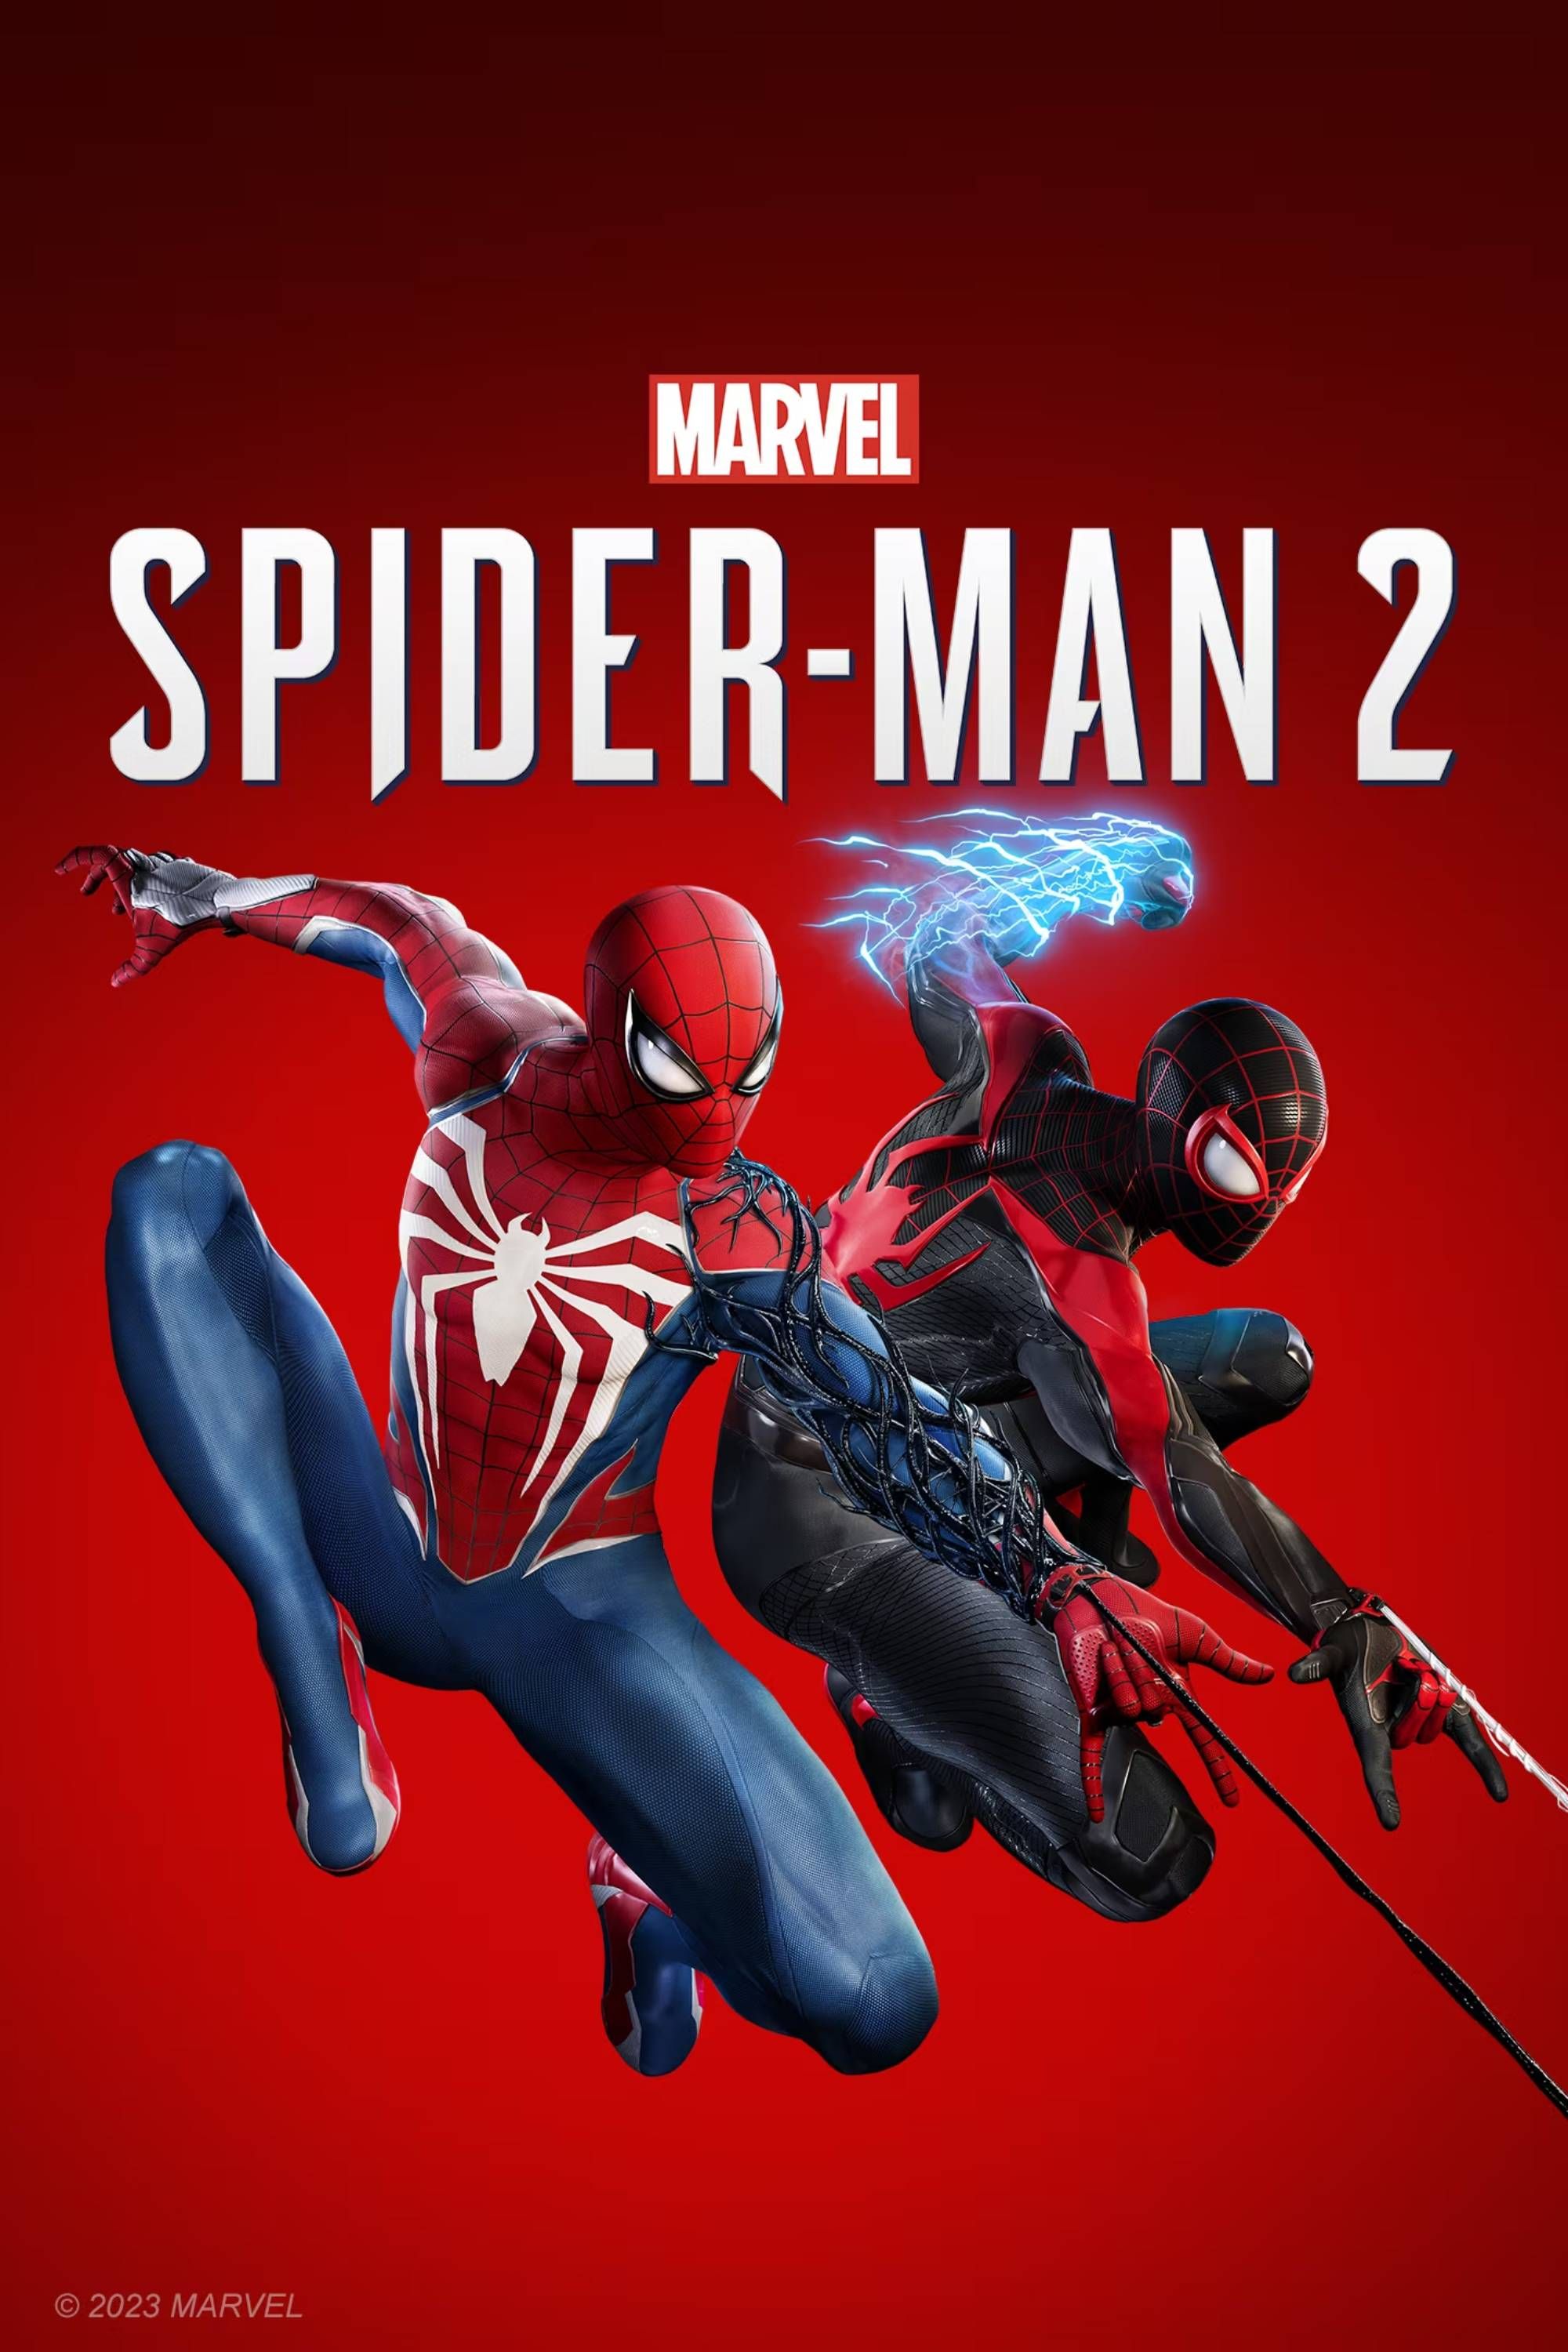 Marvel's Spider-Man 2 cover art featuring Peter Parker and Miles Morales